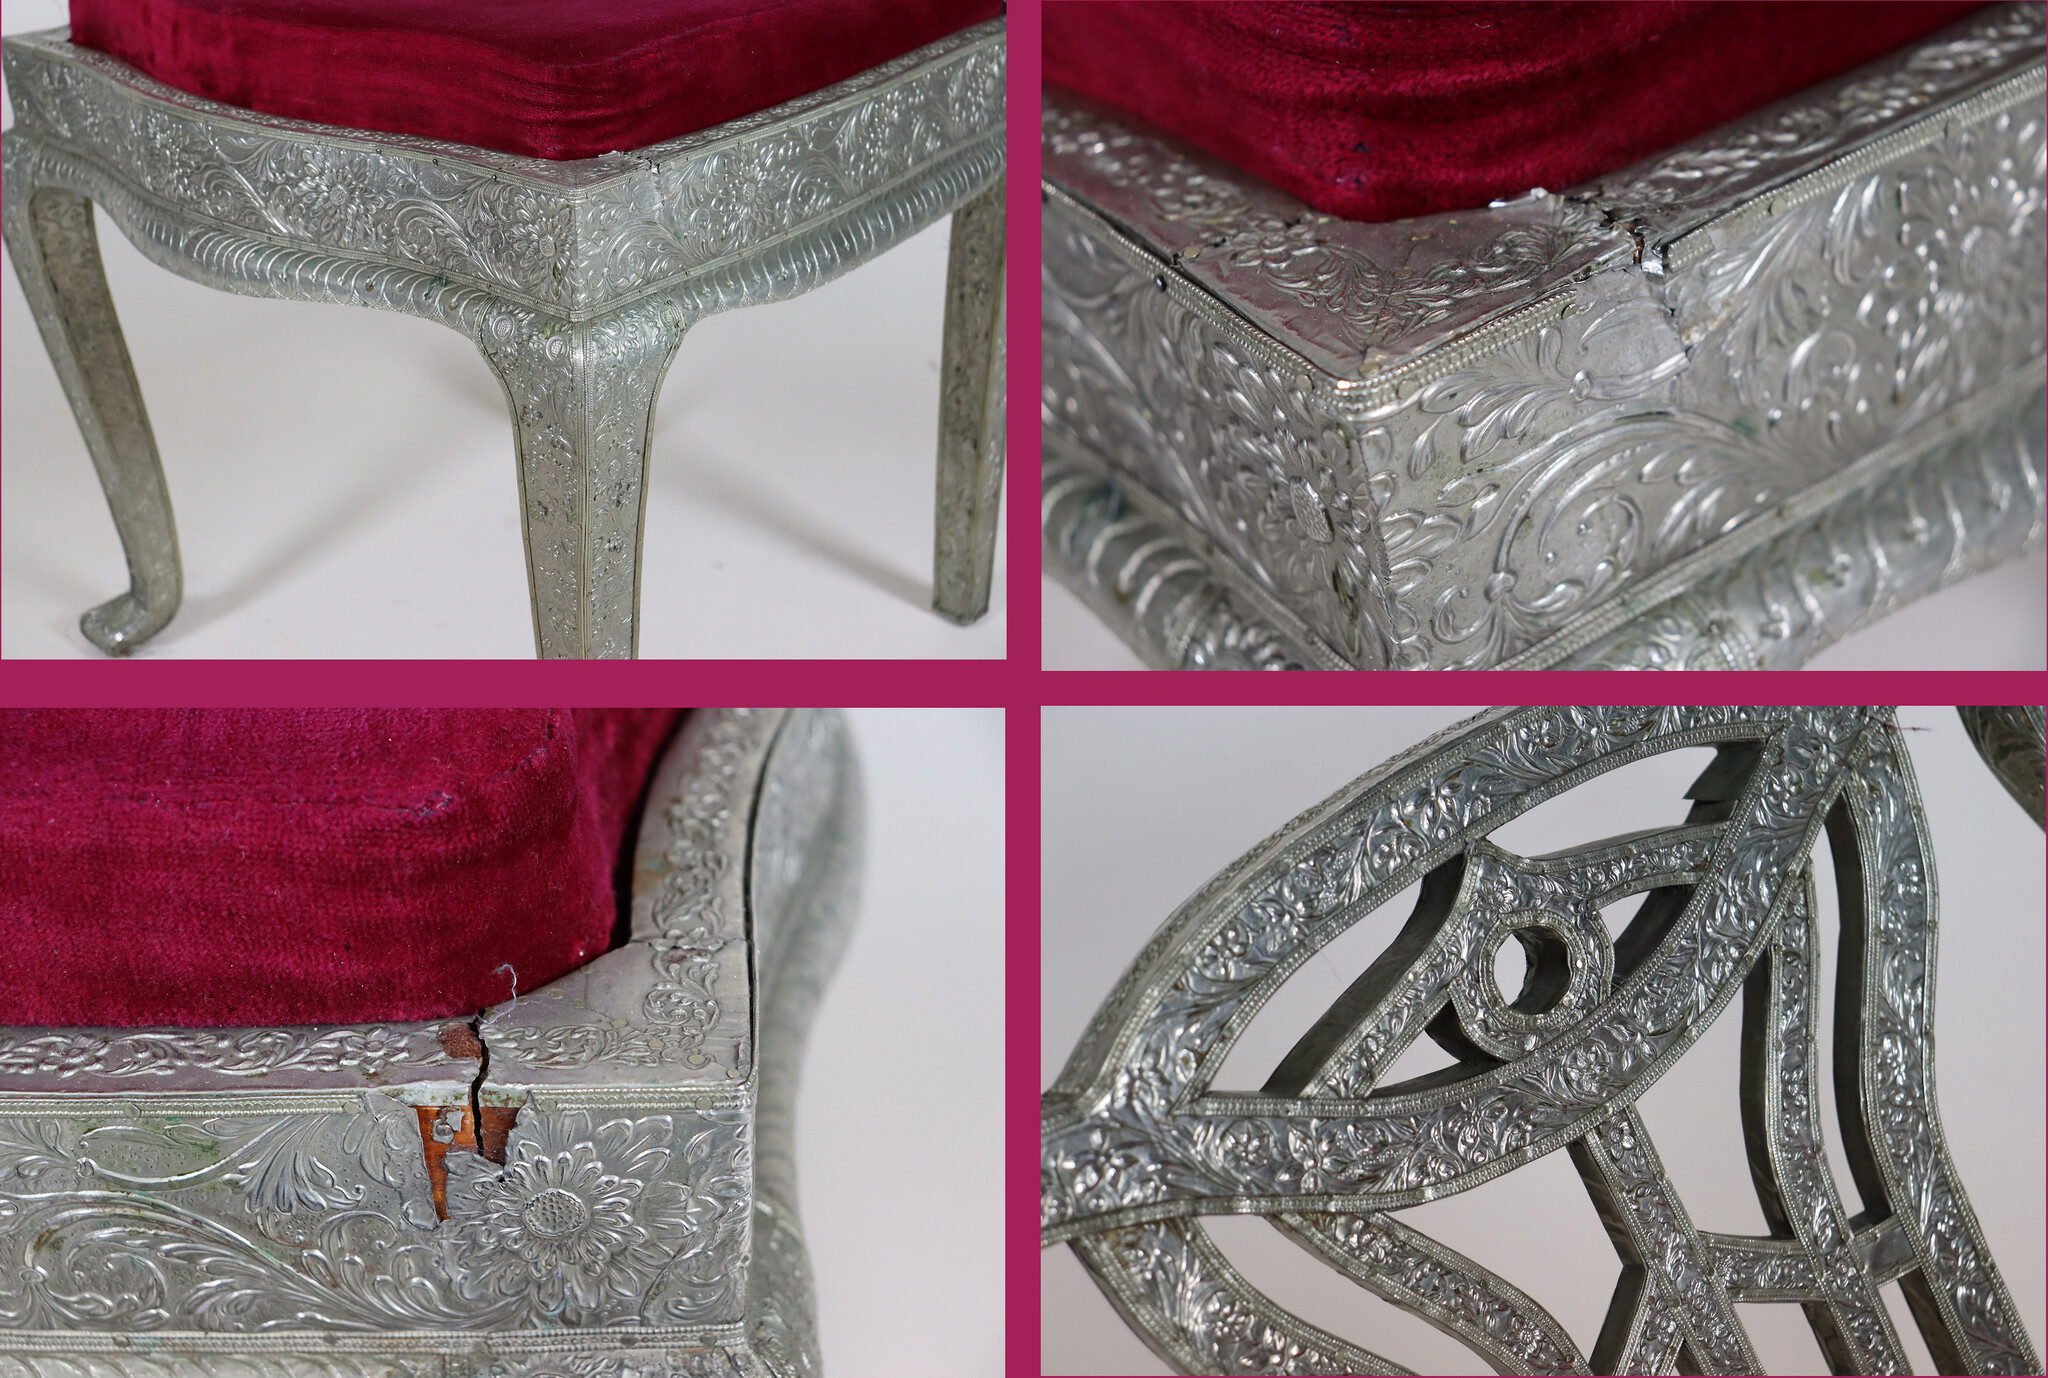 Anglo-Indian silvered side chair 23/A